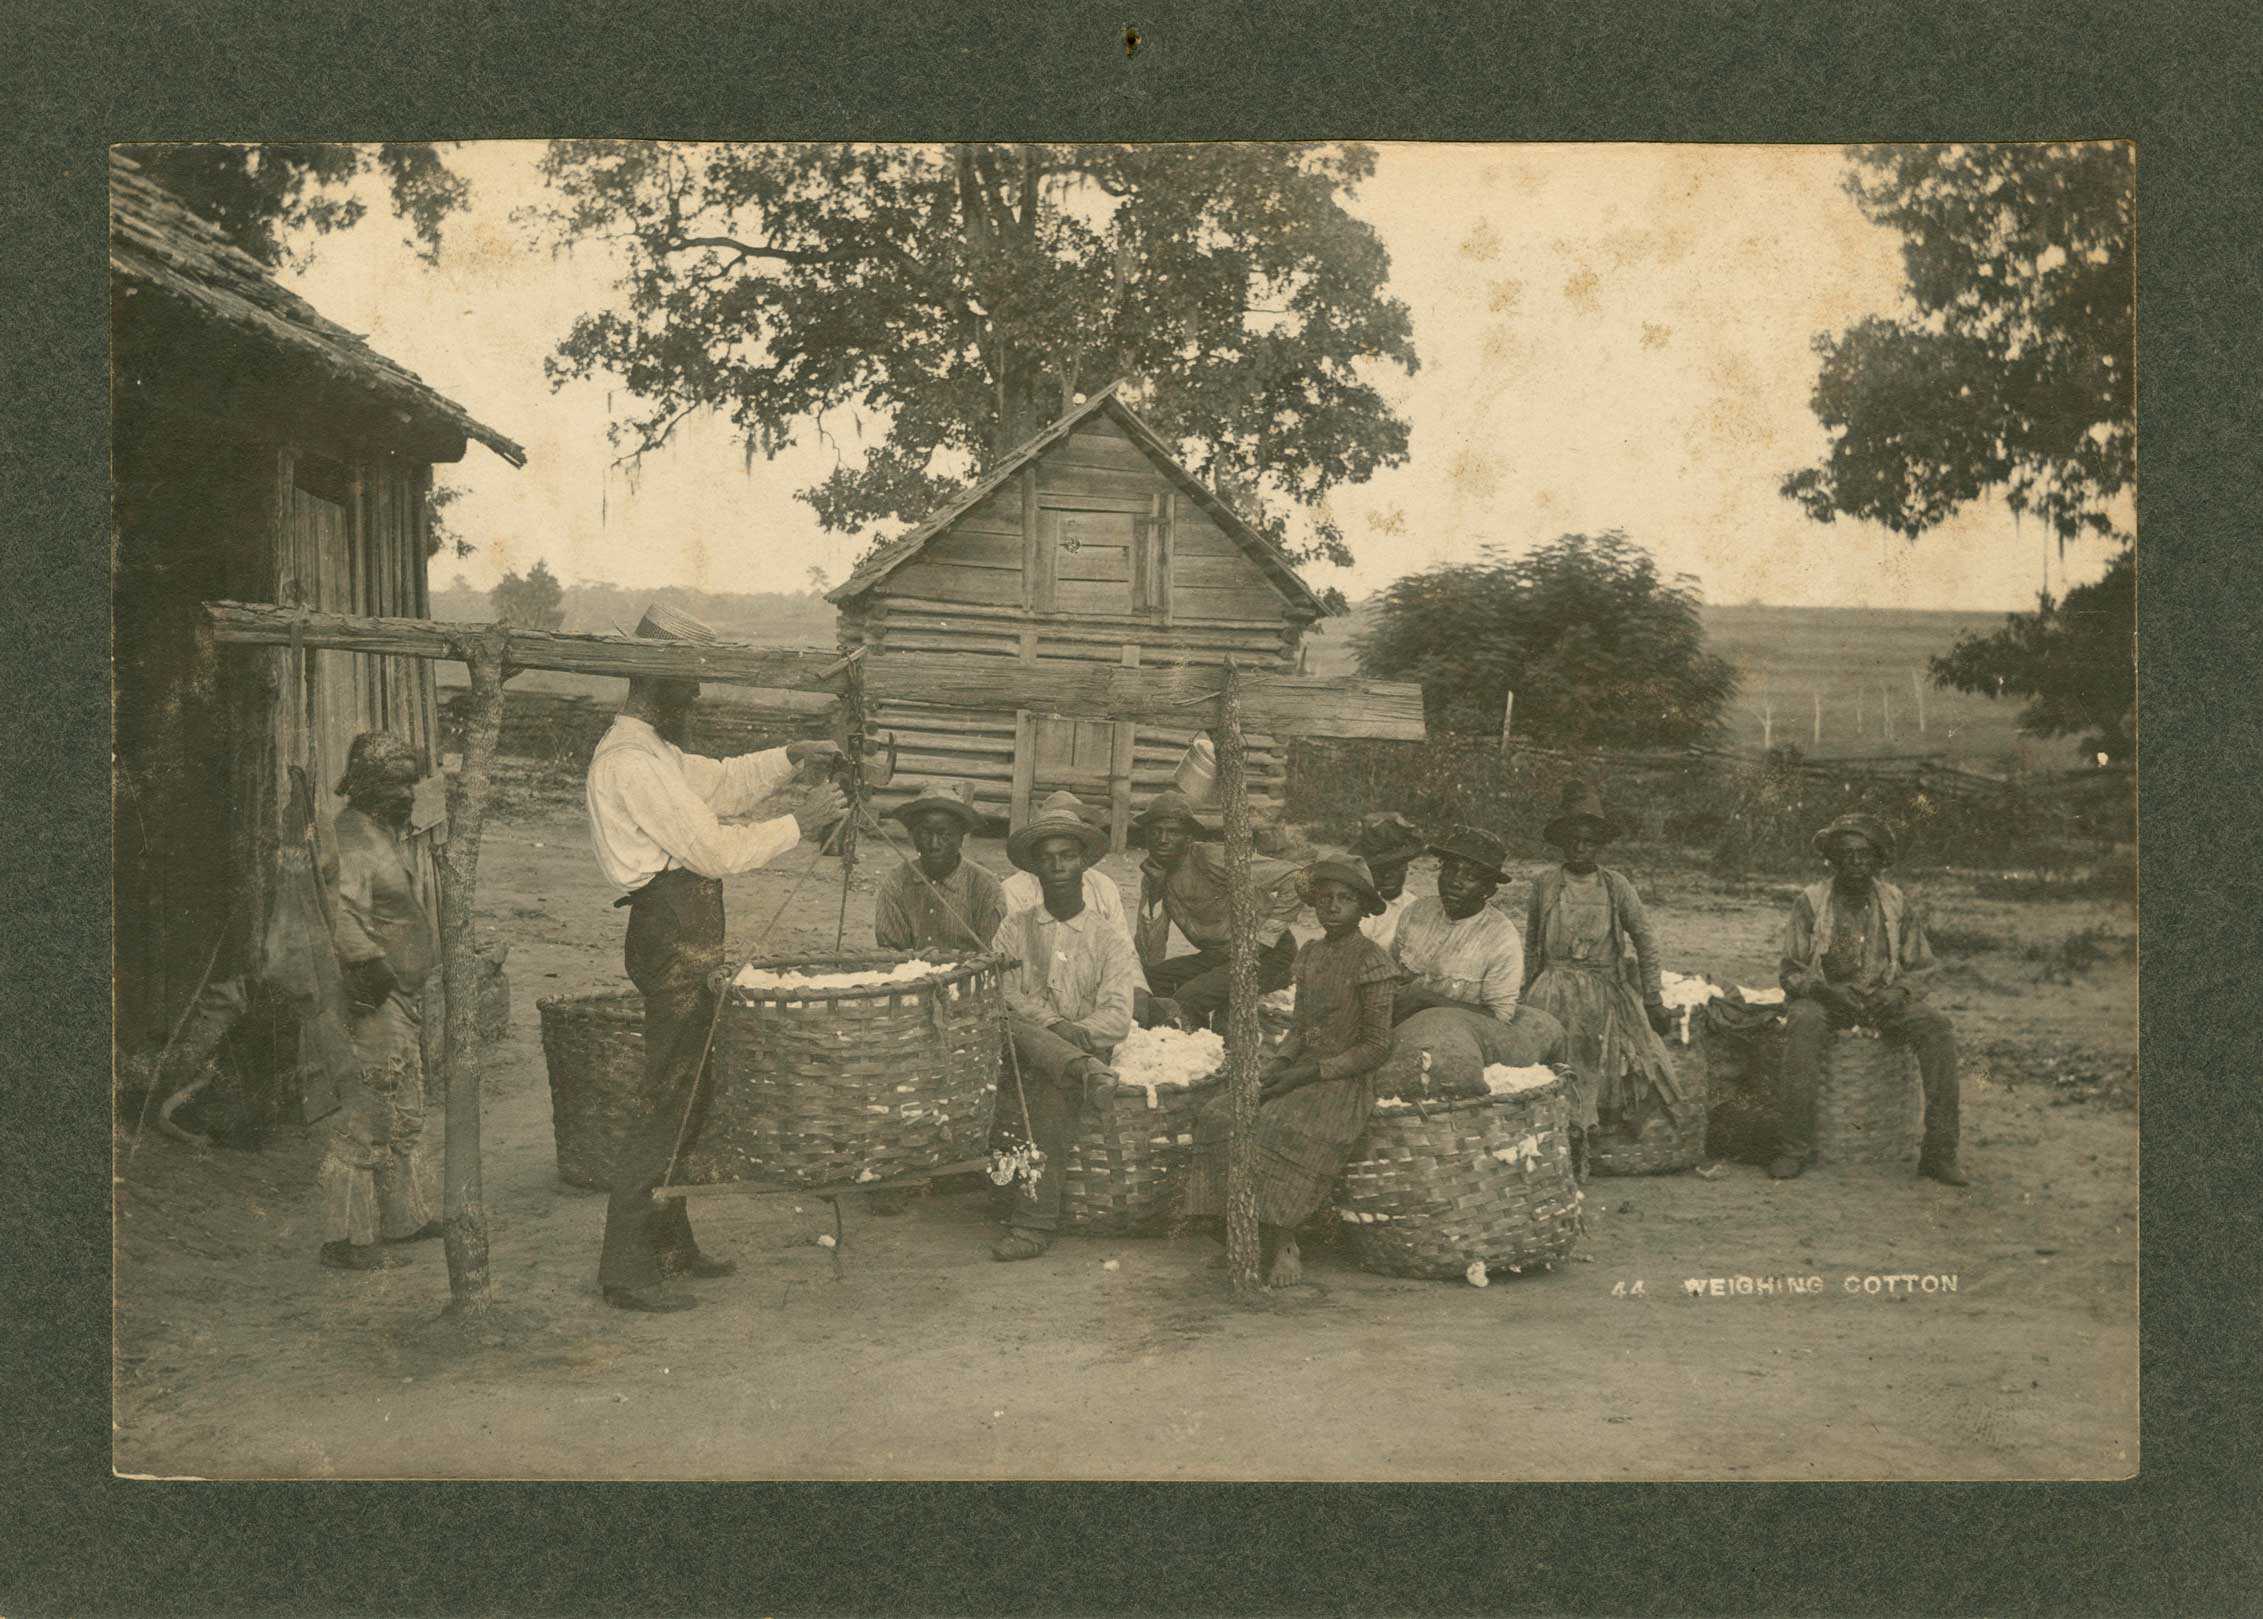 Black and white photograph of a man weighing cotton outside. Nine people sit on baskets of cotton behind him.